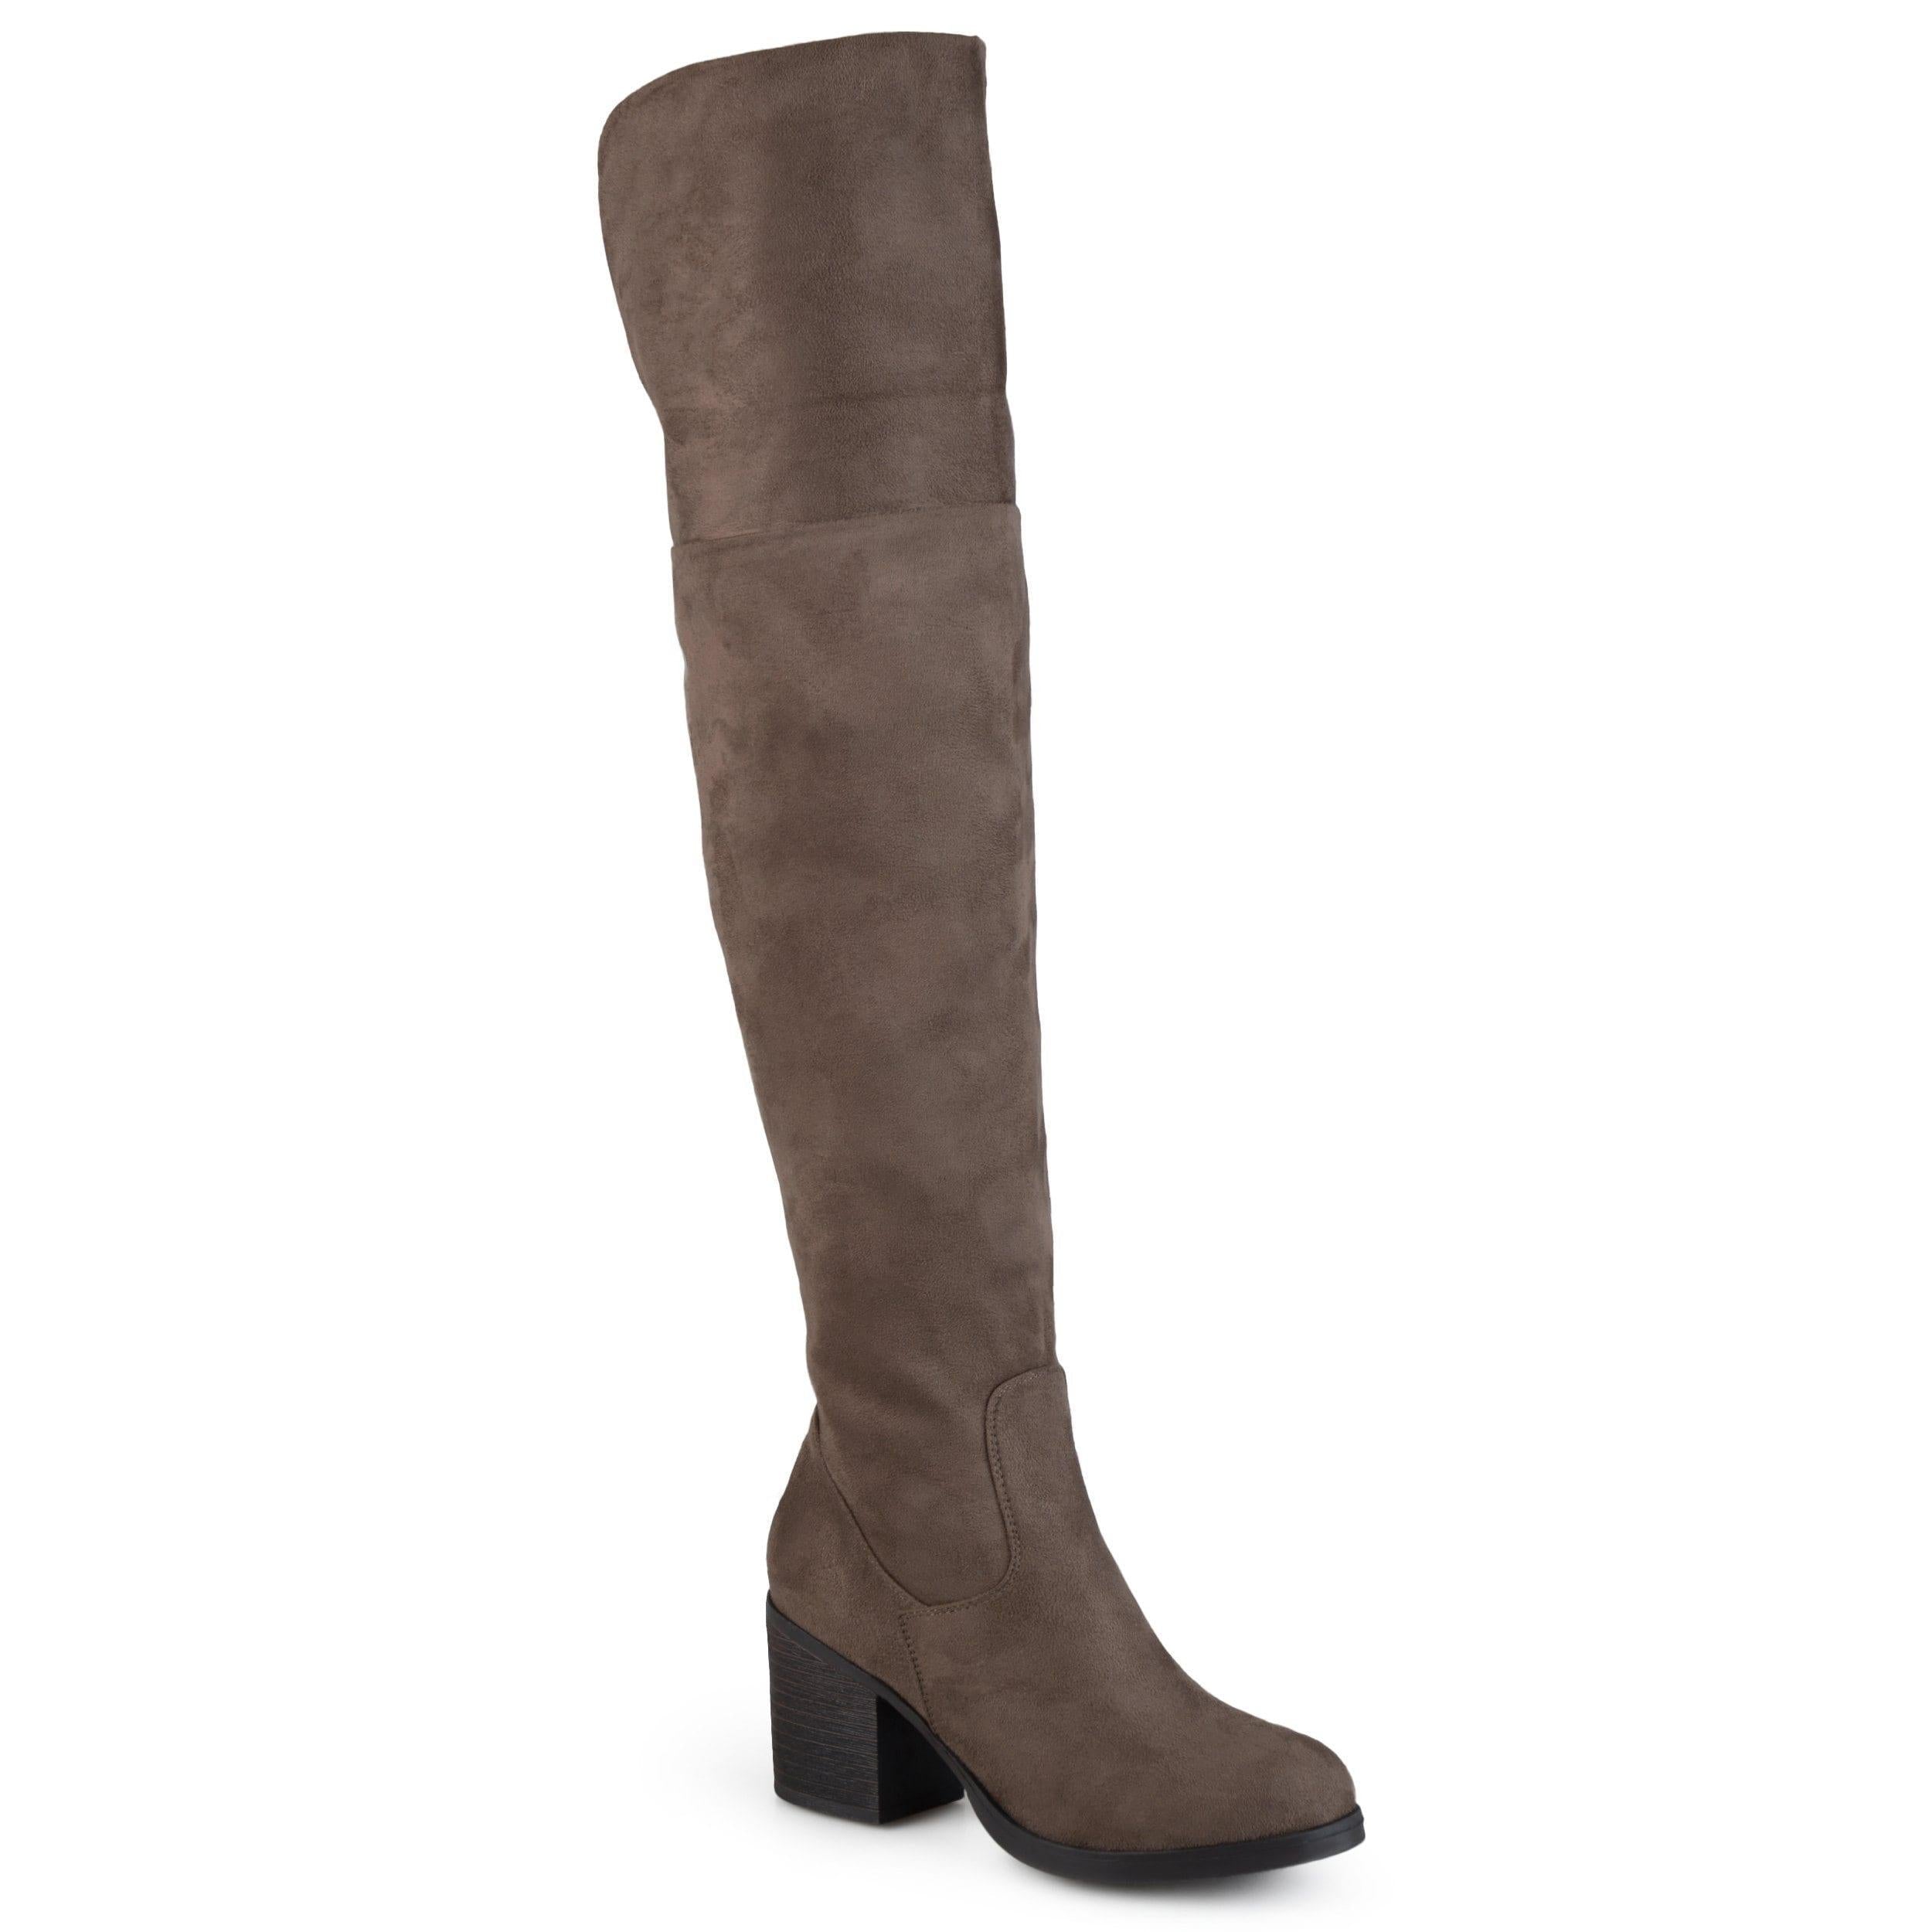 Sana Boot, Women's Over The Knee Boots